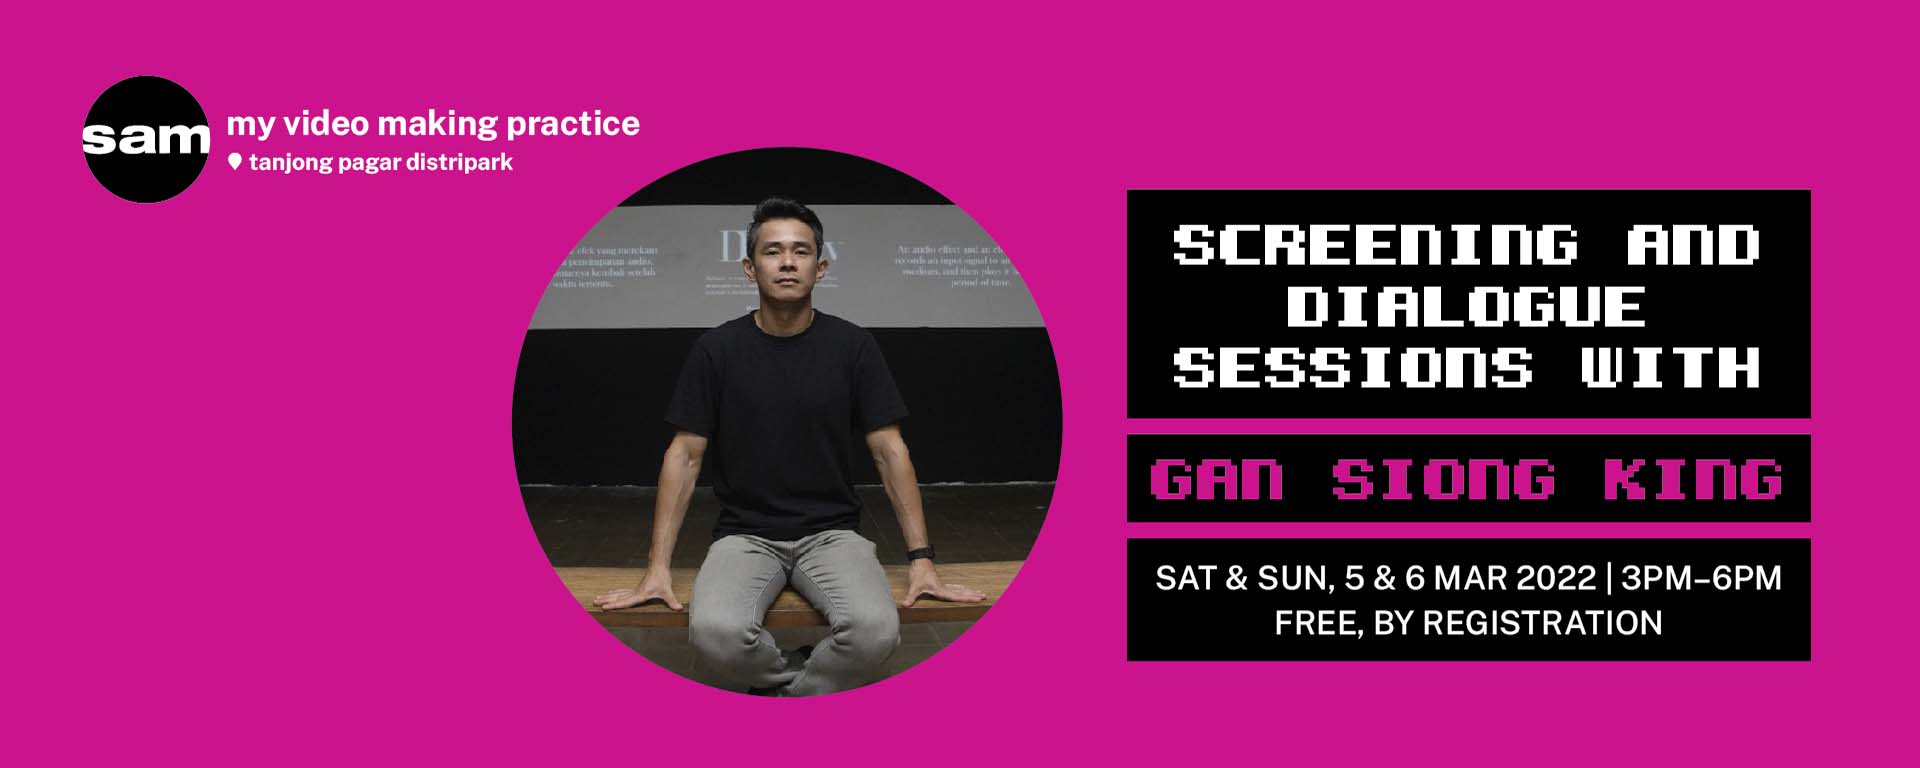 My Video Making Practice: Screening and Dialogue Sessions